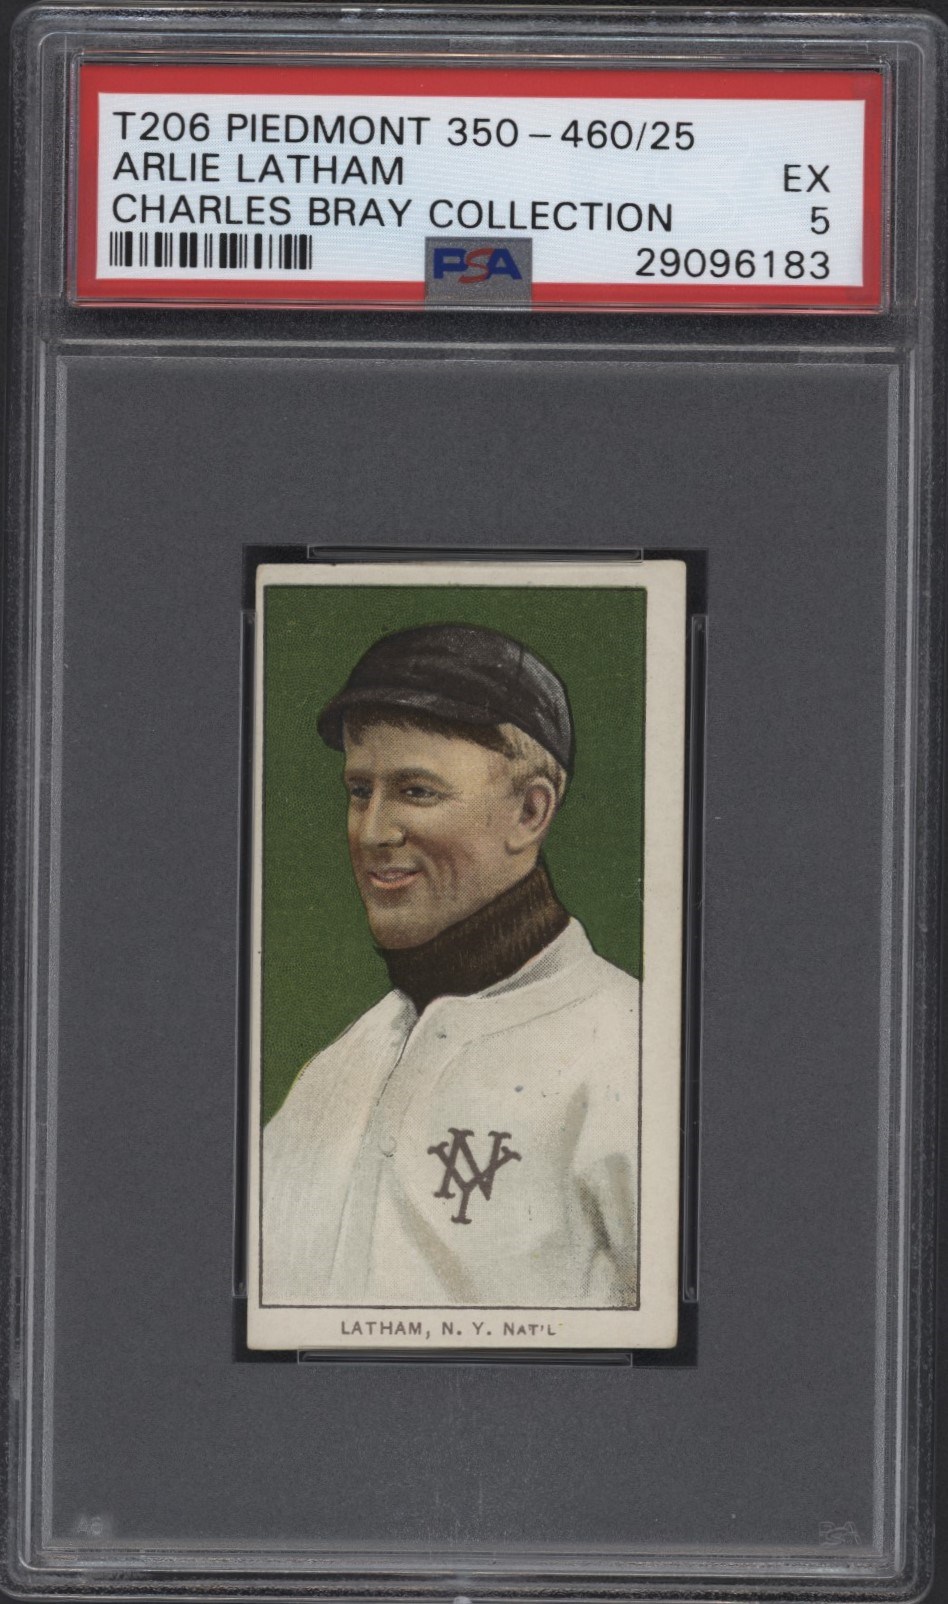 Baseball and Trading Cards - T206 Piedmont 350-460/25 Arlie Latham PSA 5 From the Charles Bray Collection